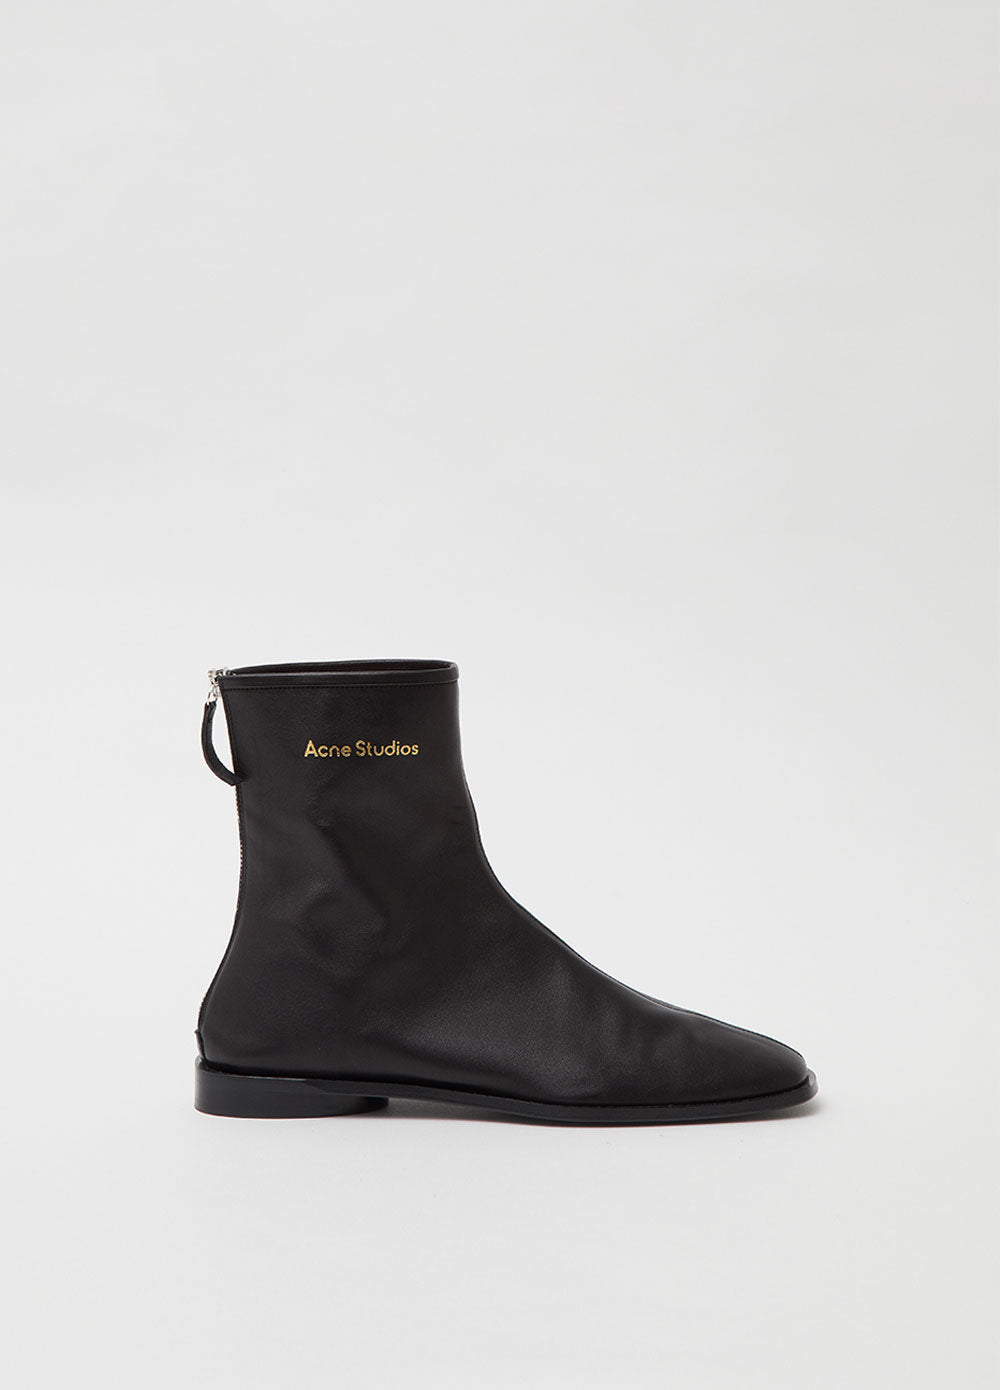 acne womens boots